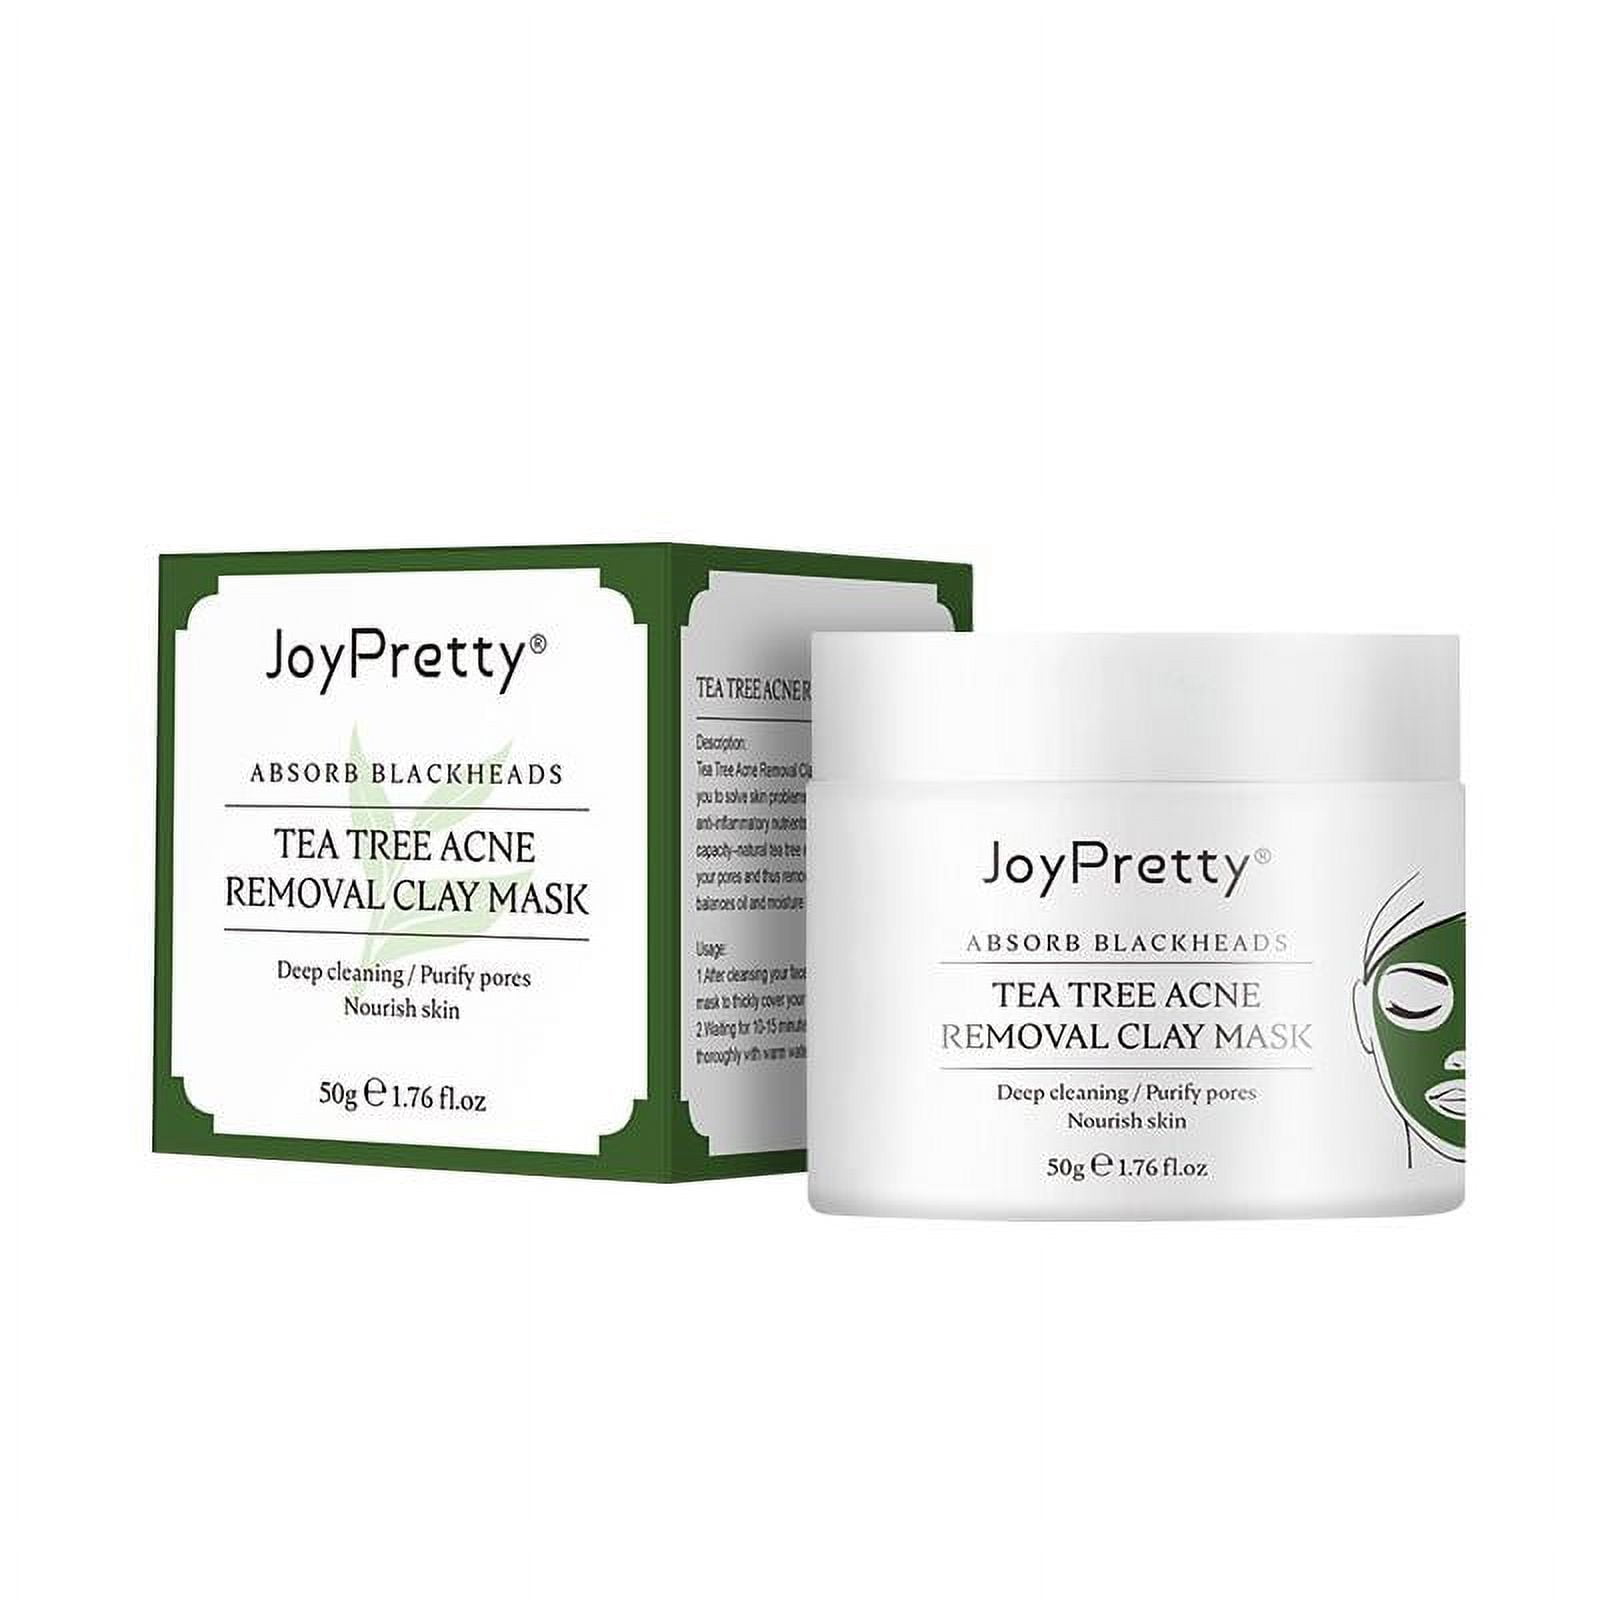 Tea Tree Acne Removal Clay Mask